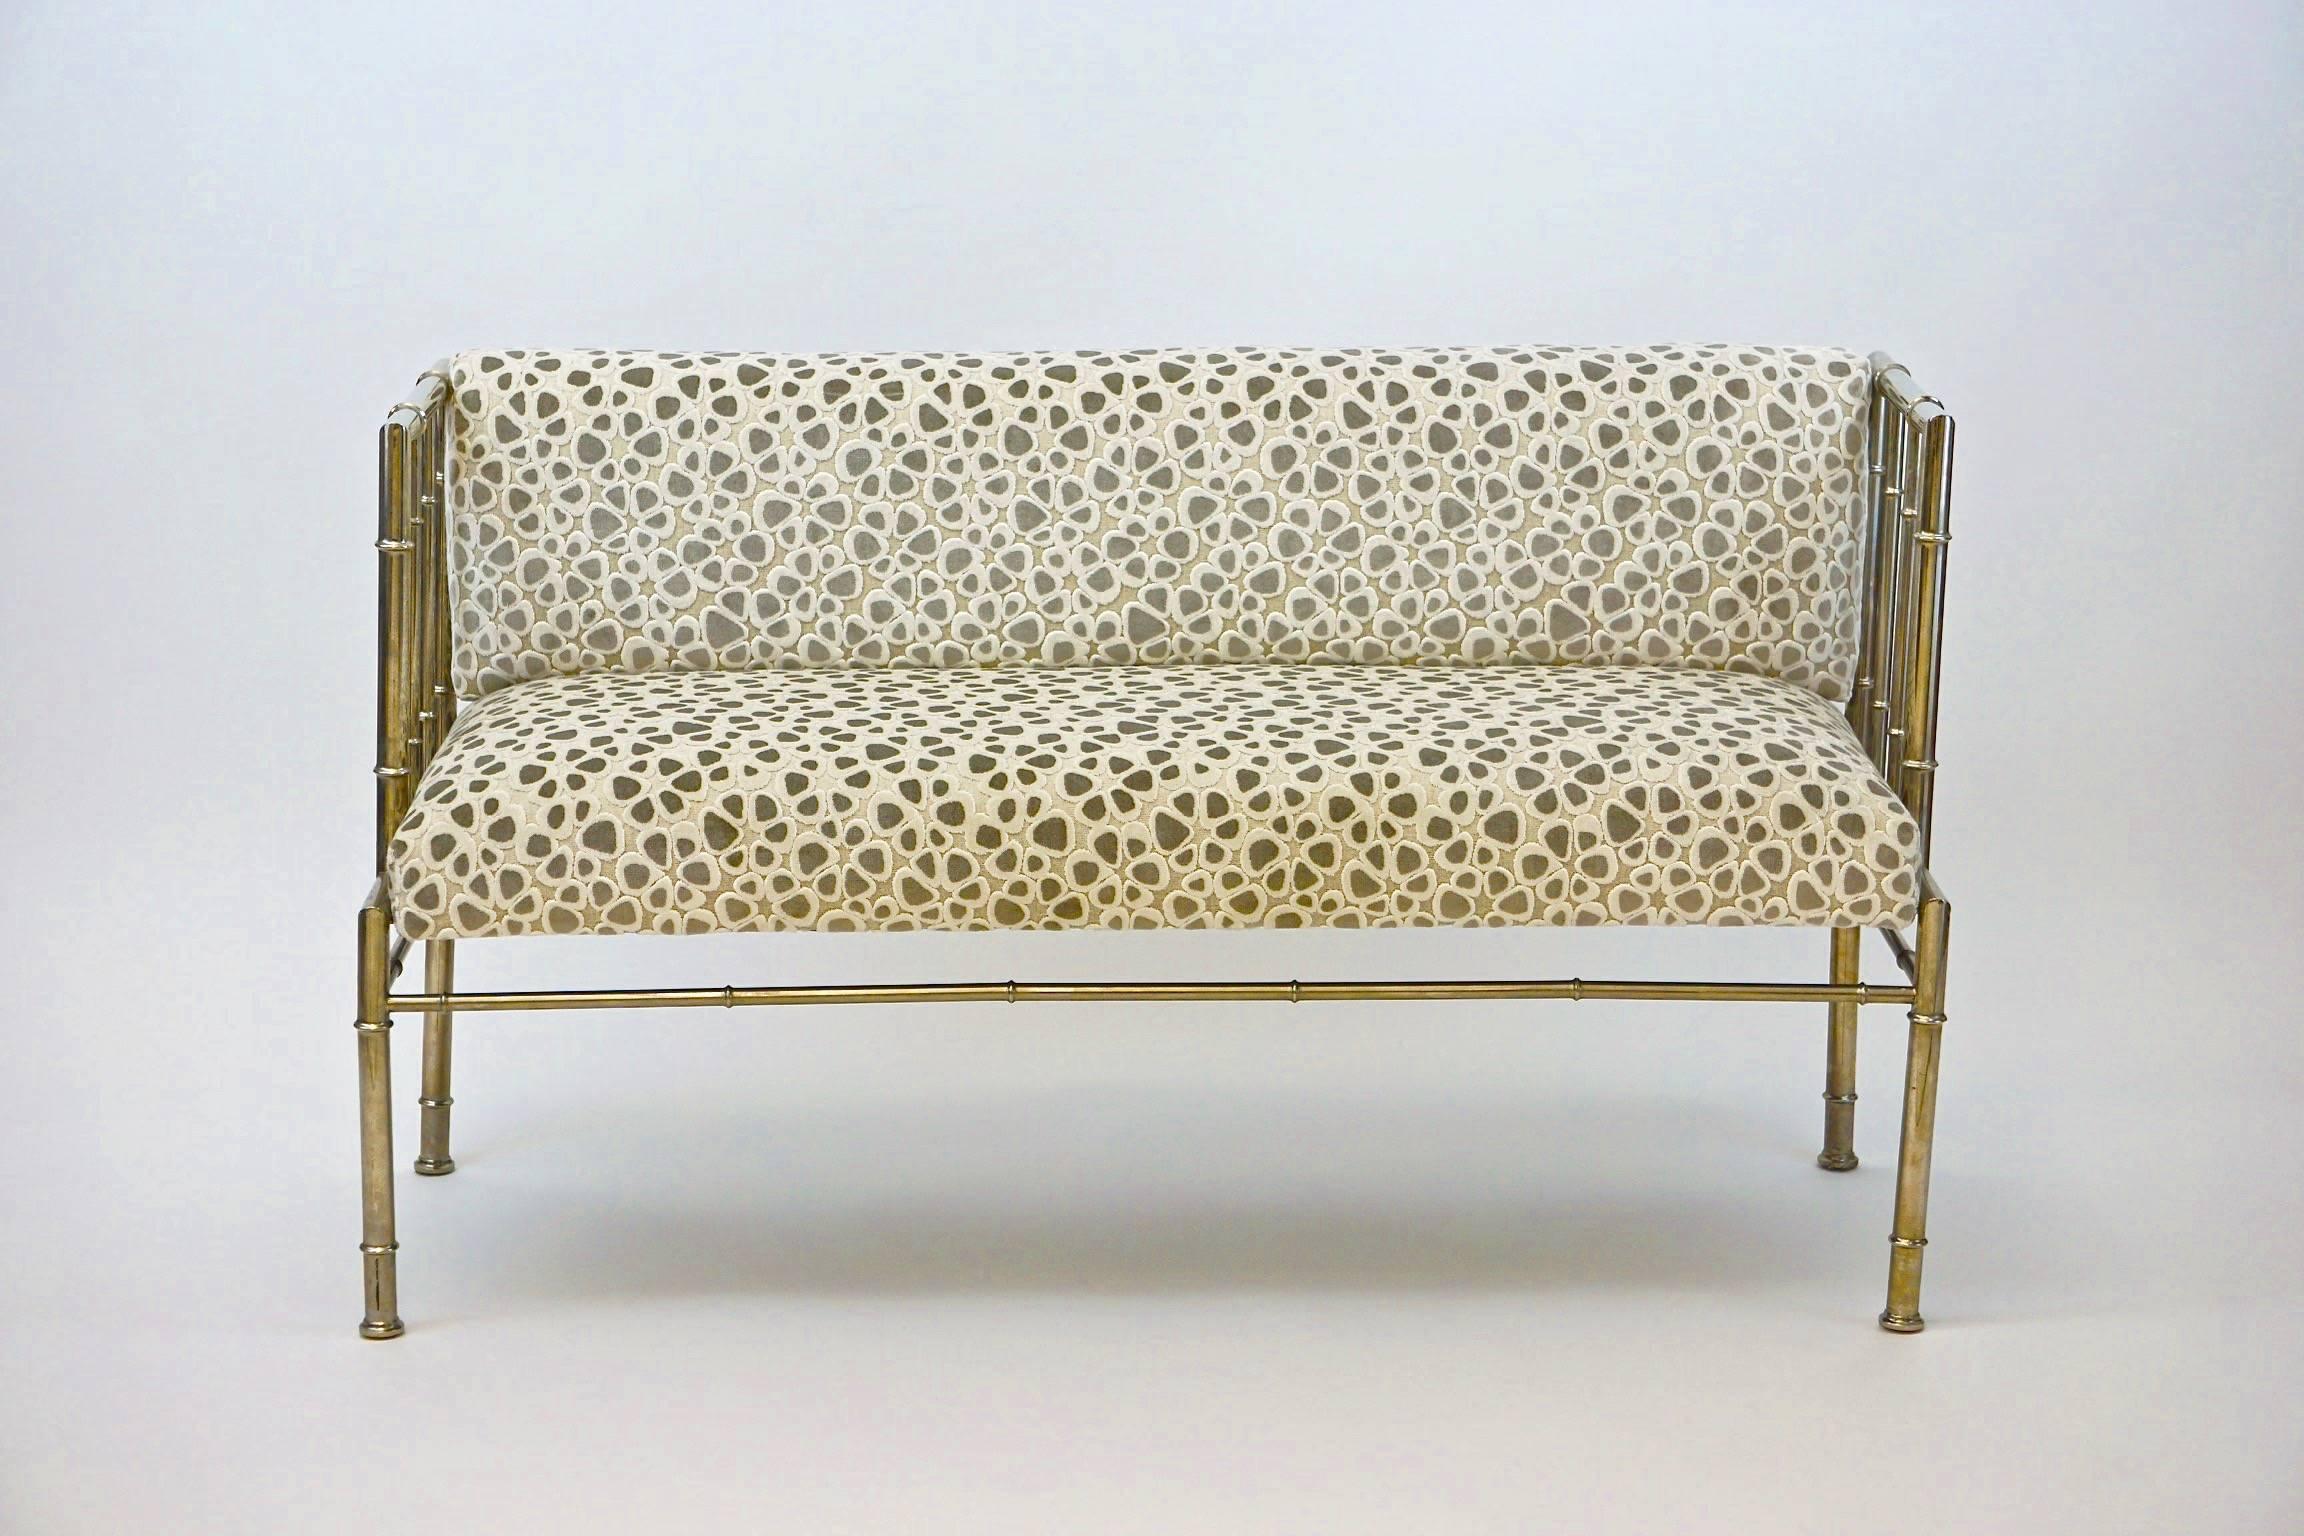 Vintage '70s-Chic Chrome Settee with faux bamboo detailing. Newly upholstered seat and back in Romo textured velvet, gray and crème on taupe.

20% OFF listed prices on all our items Nov. 1-30.